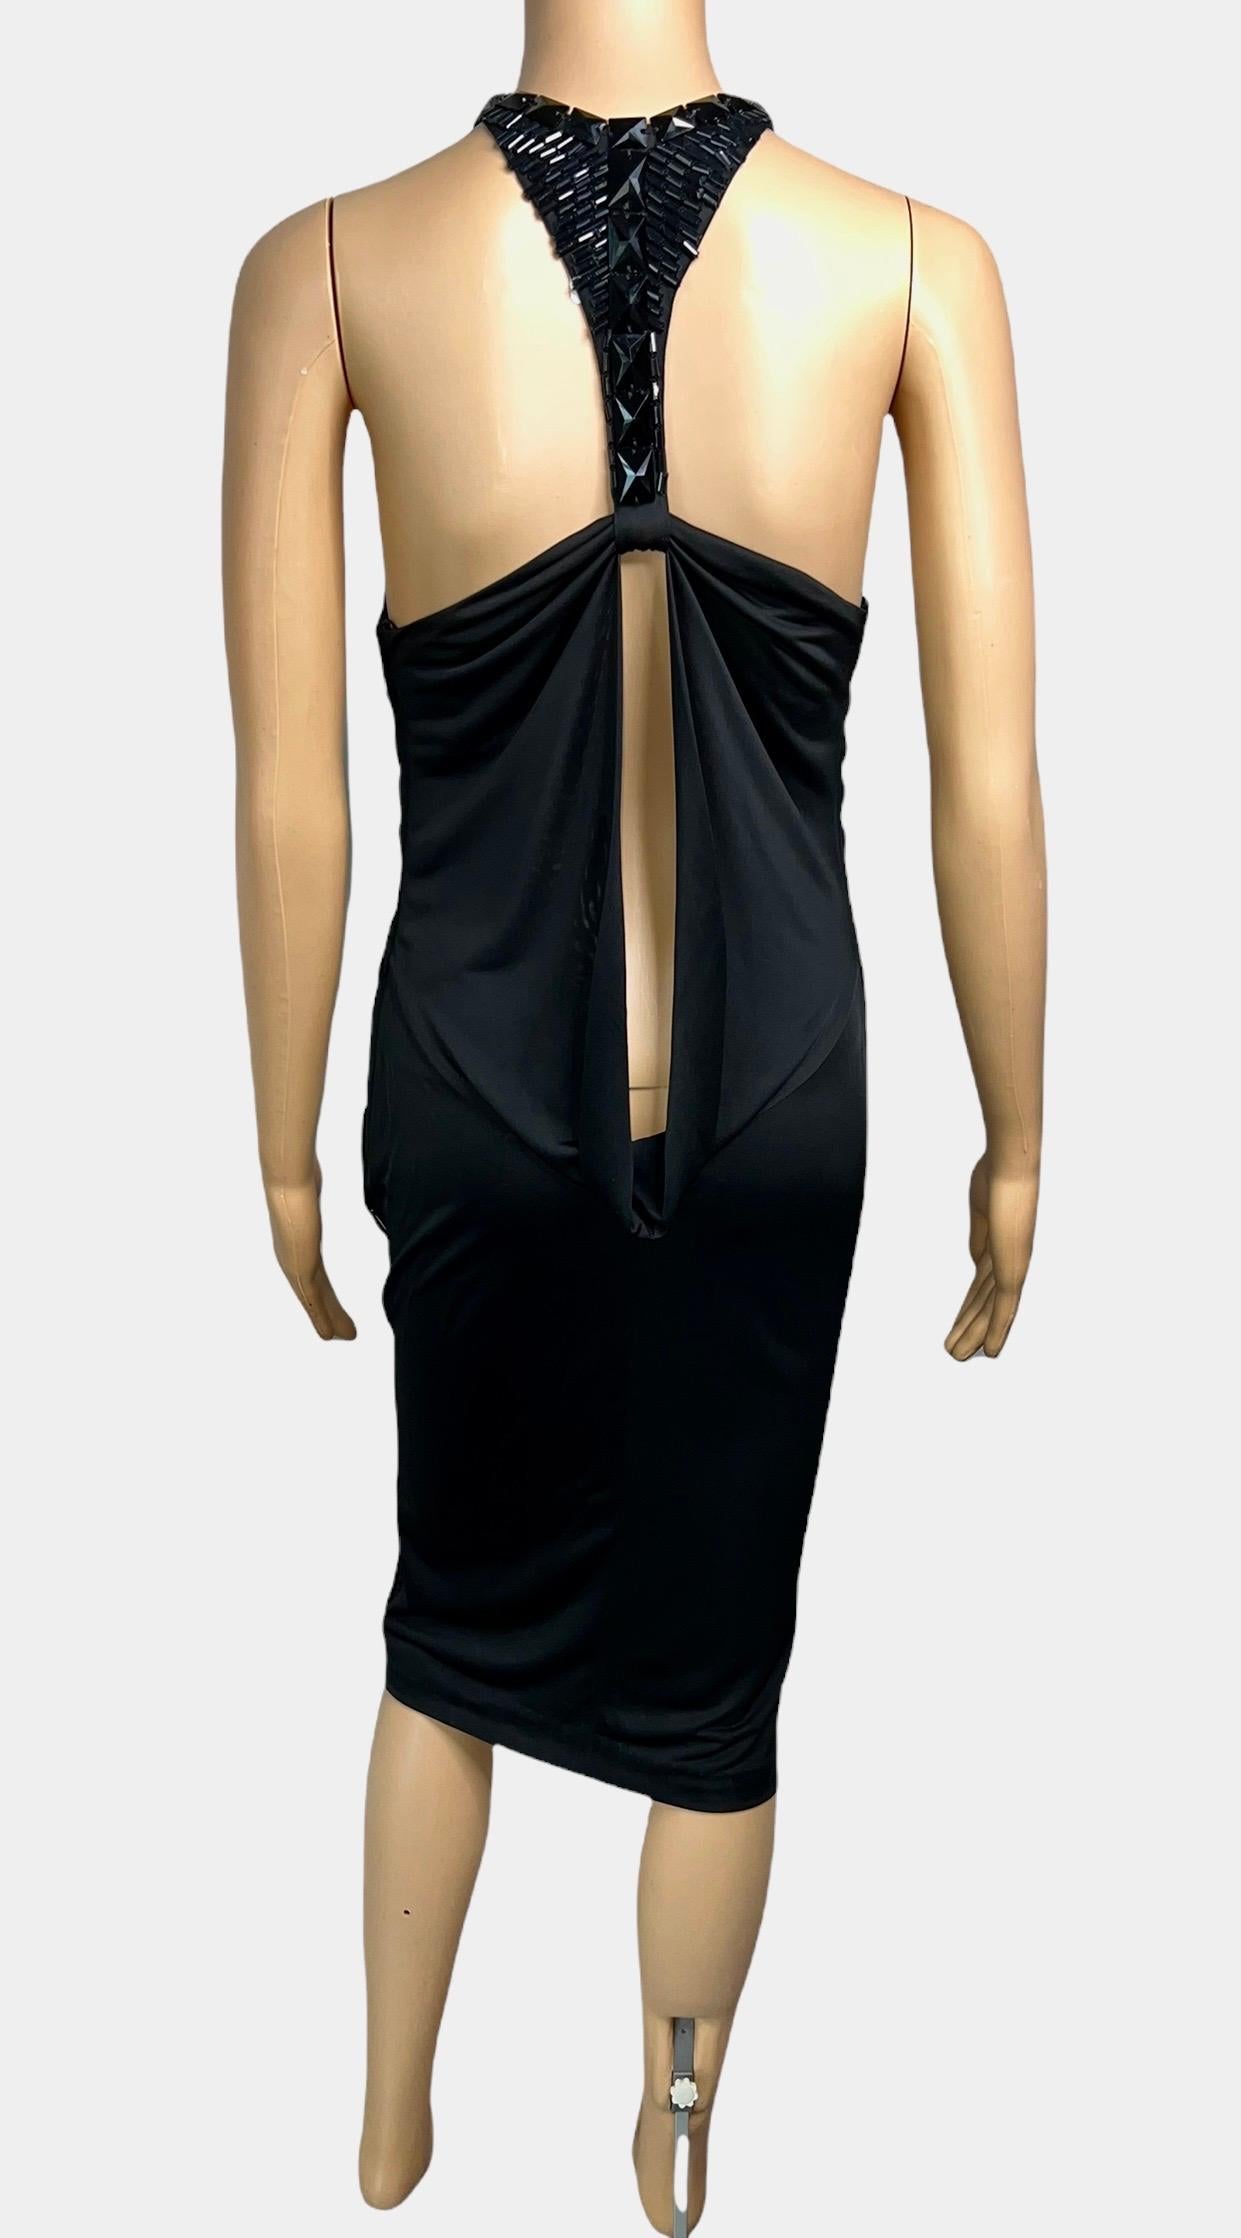 Tom Ford for Gucci F/W 2004 Embellished Plunging Cutout Black Evening Dress  For Sale 1